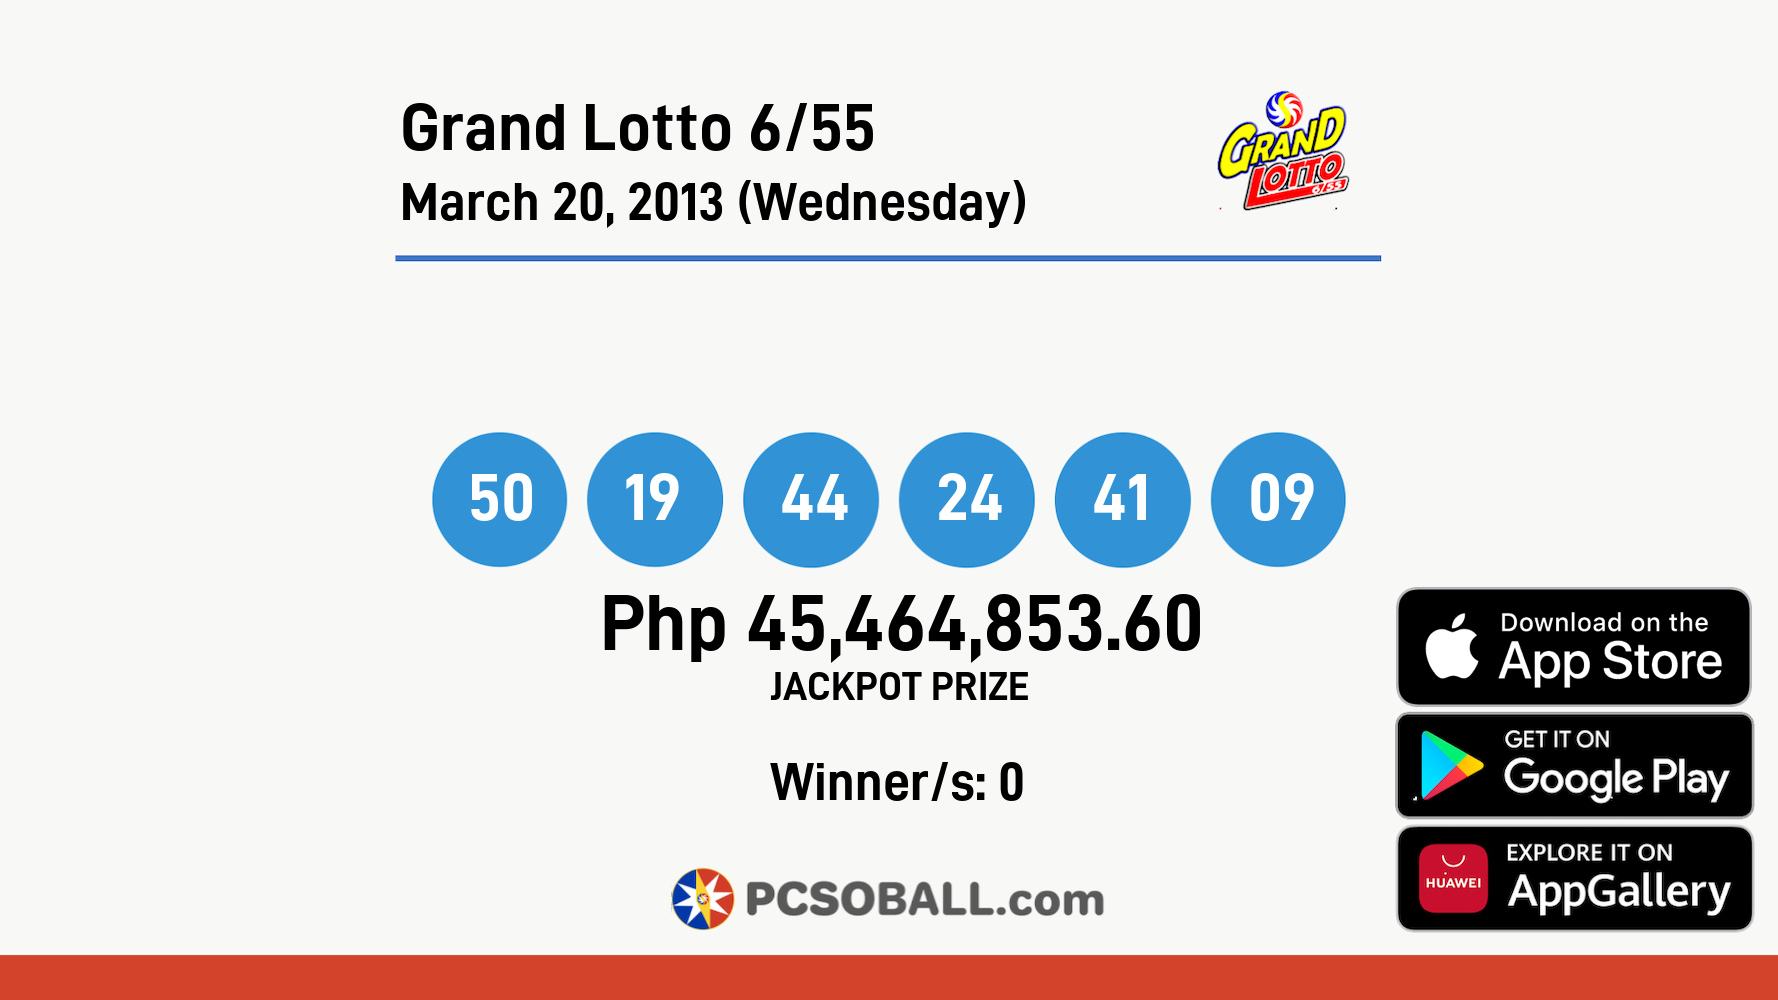 Grand Lotto 6/55 March 20, 2013 (Wednesday) Result